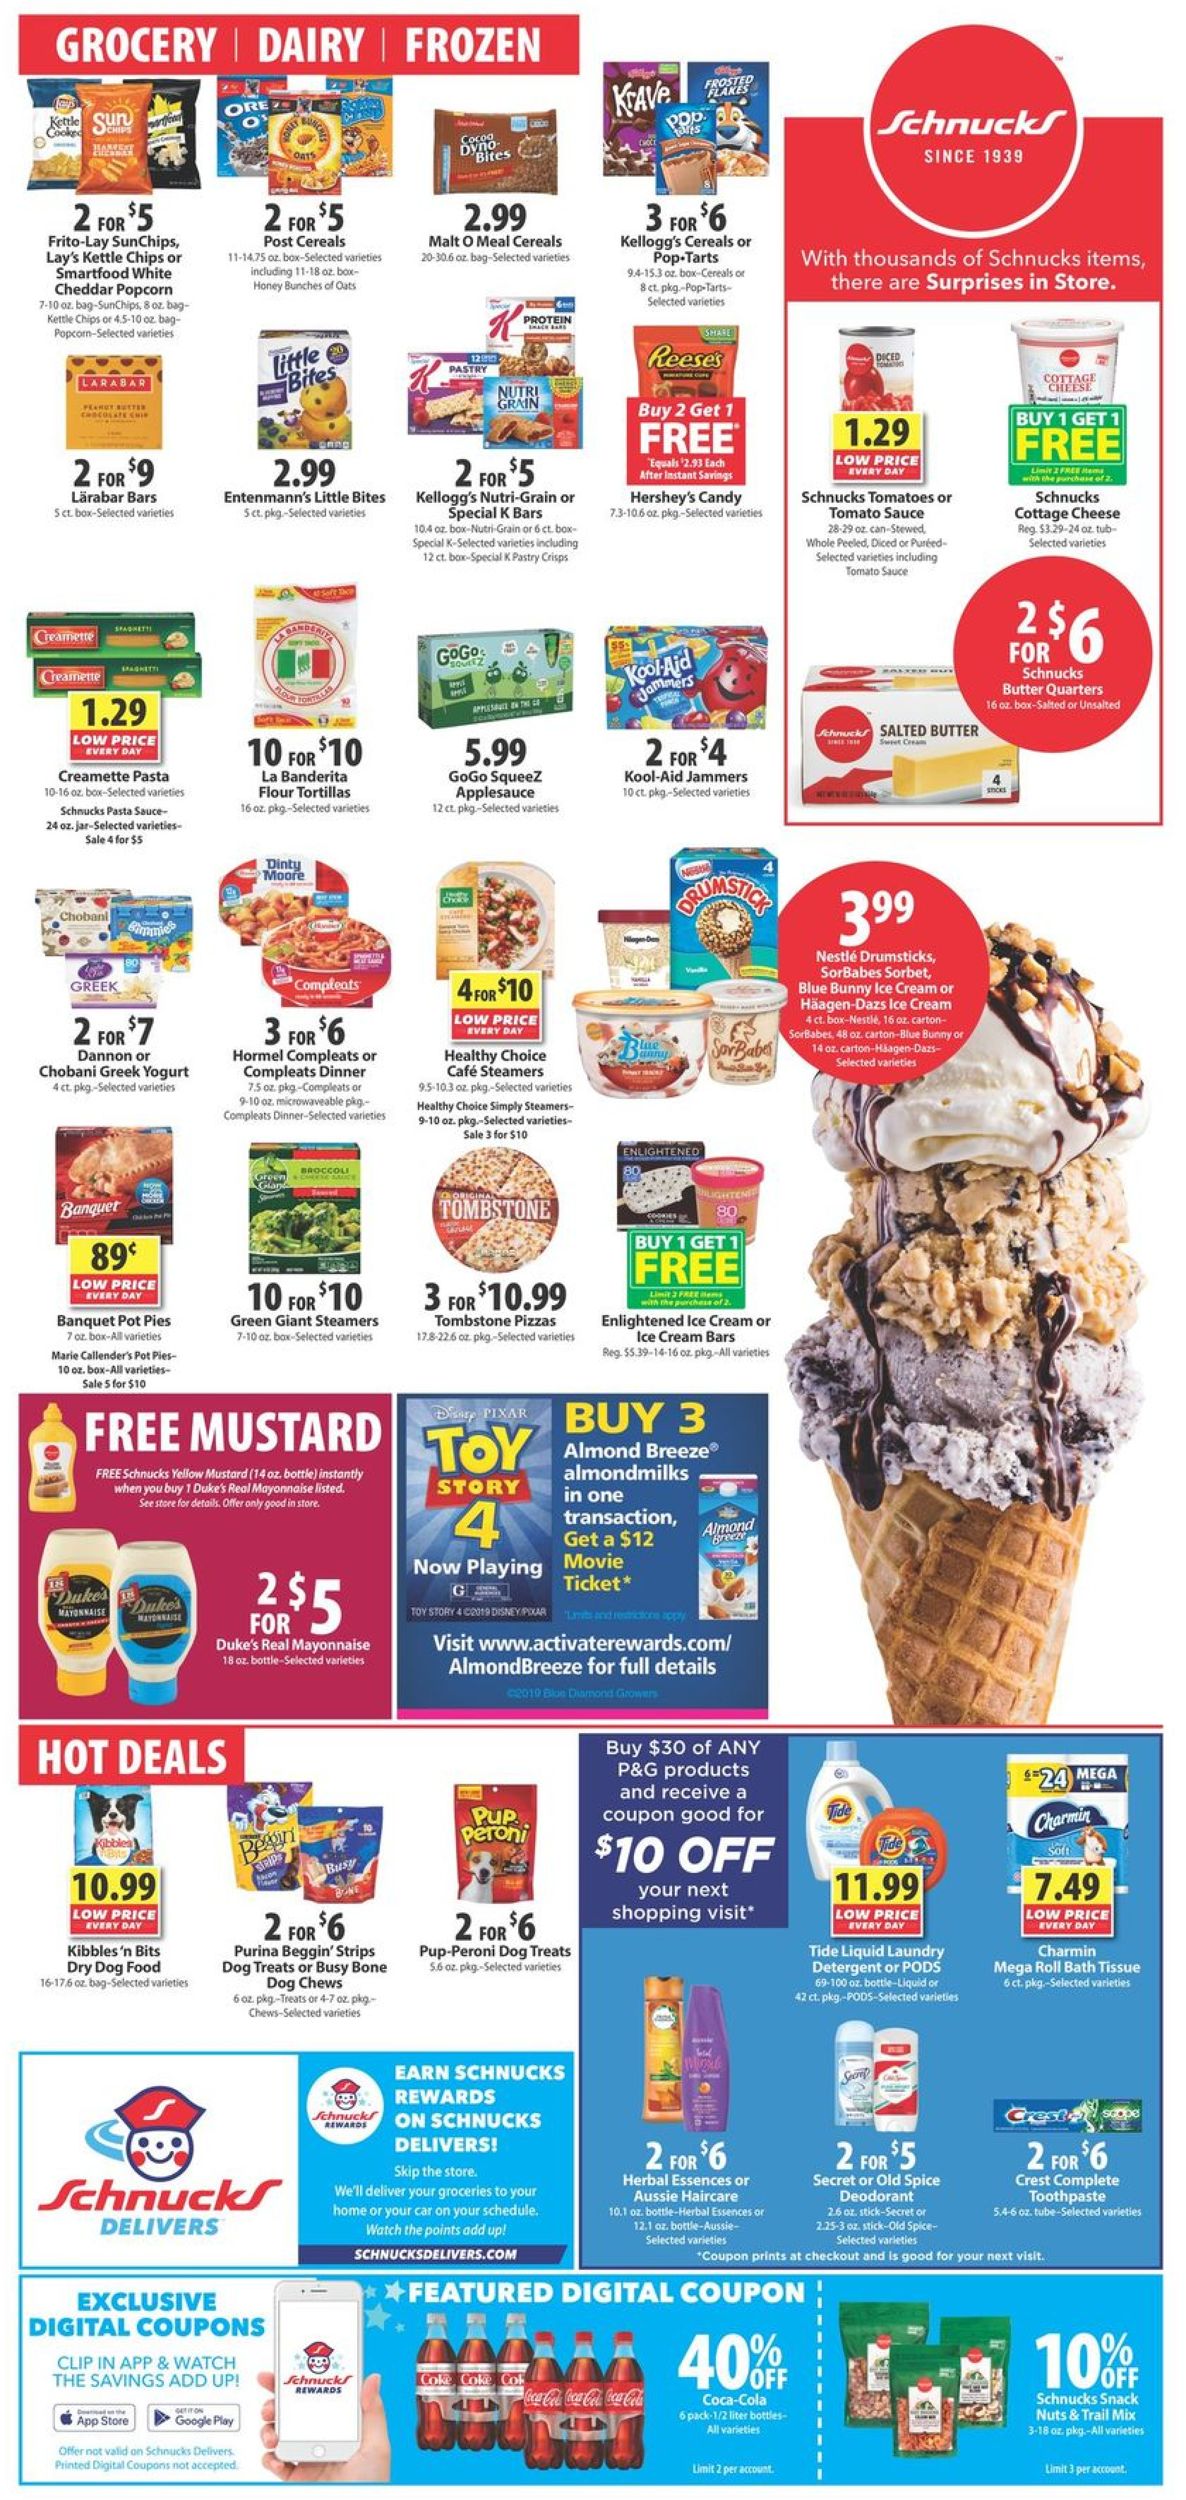 Schnucks Current weekly ad 07/10 - 07/16/2019 [3] - frequent-ads.com